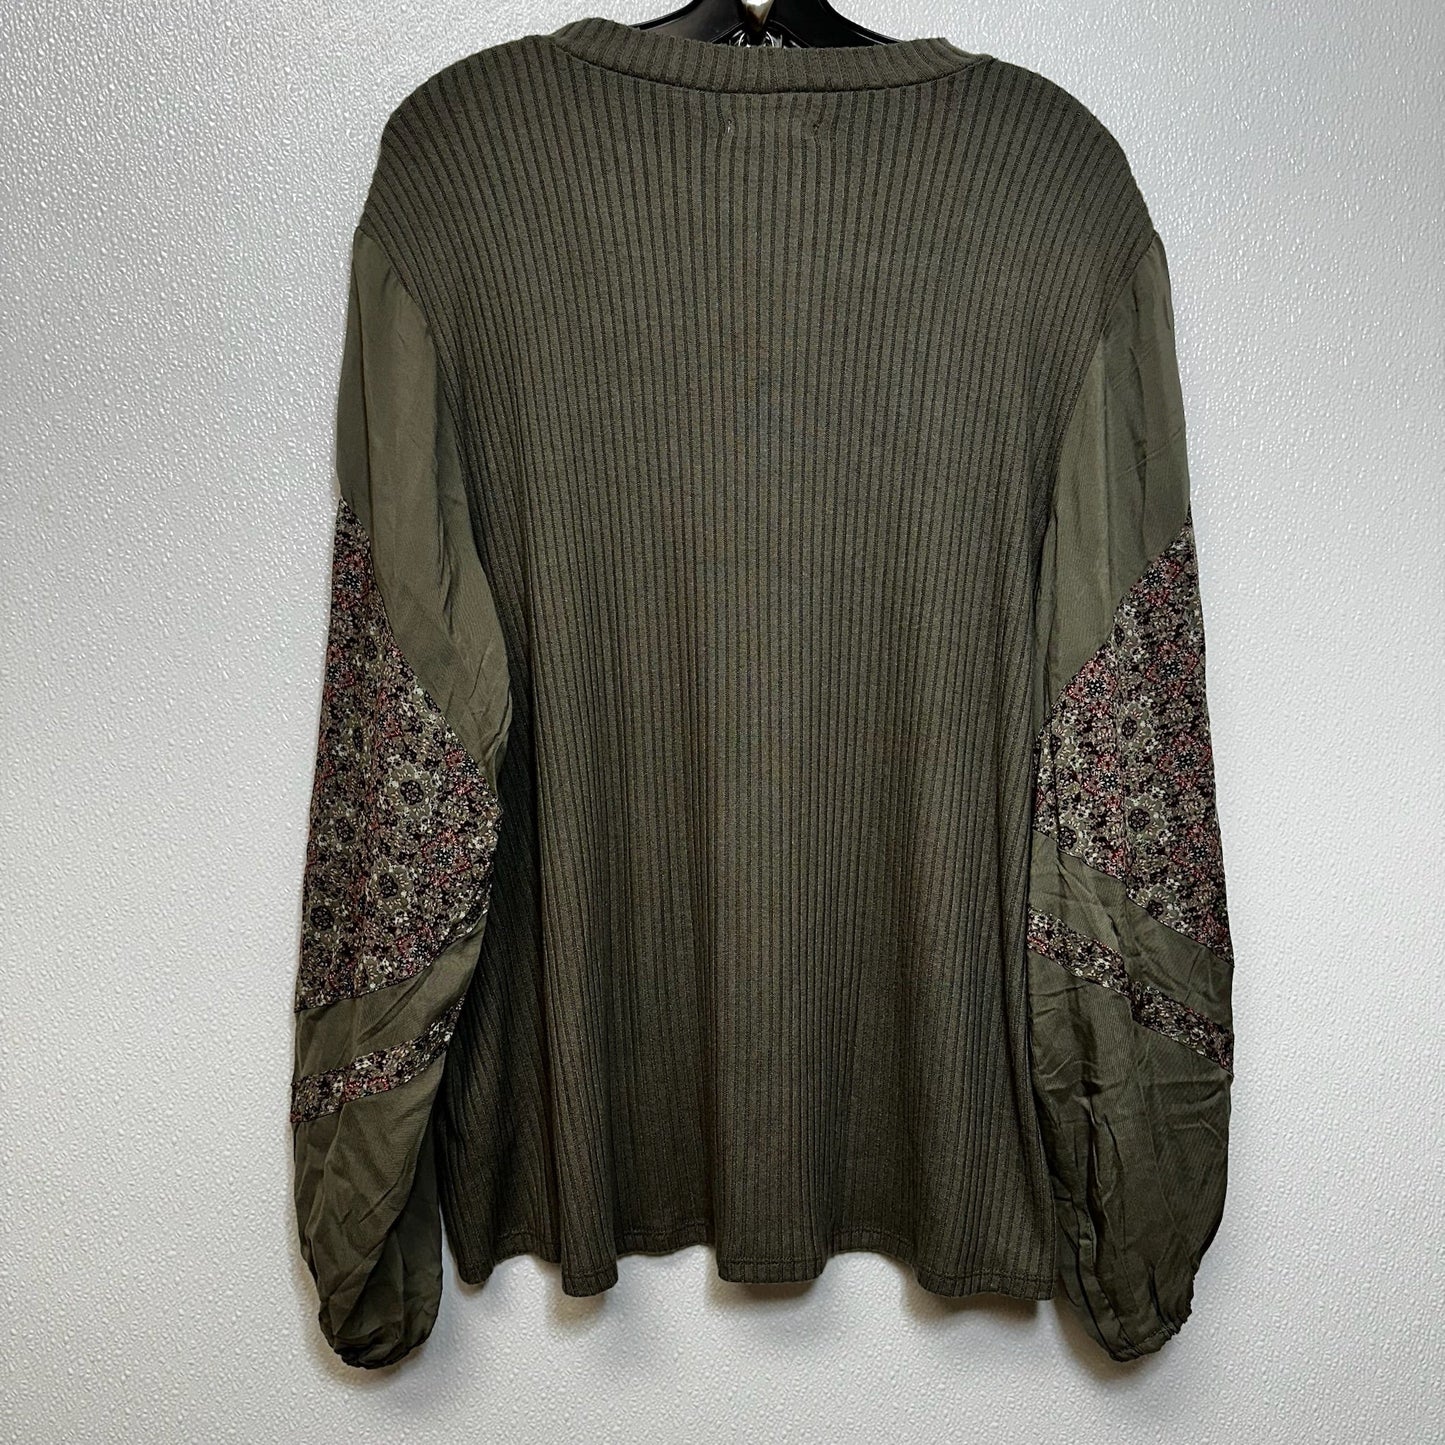 Olive Top Long Sleeve Maurices O, Size Xxl